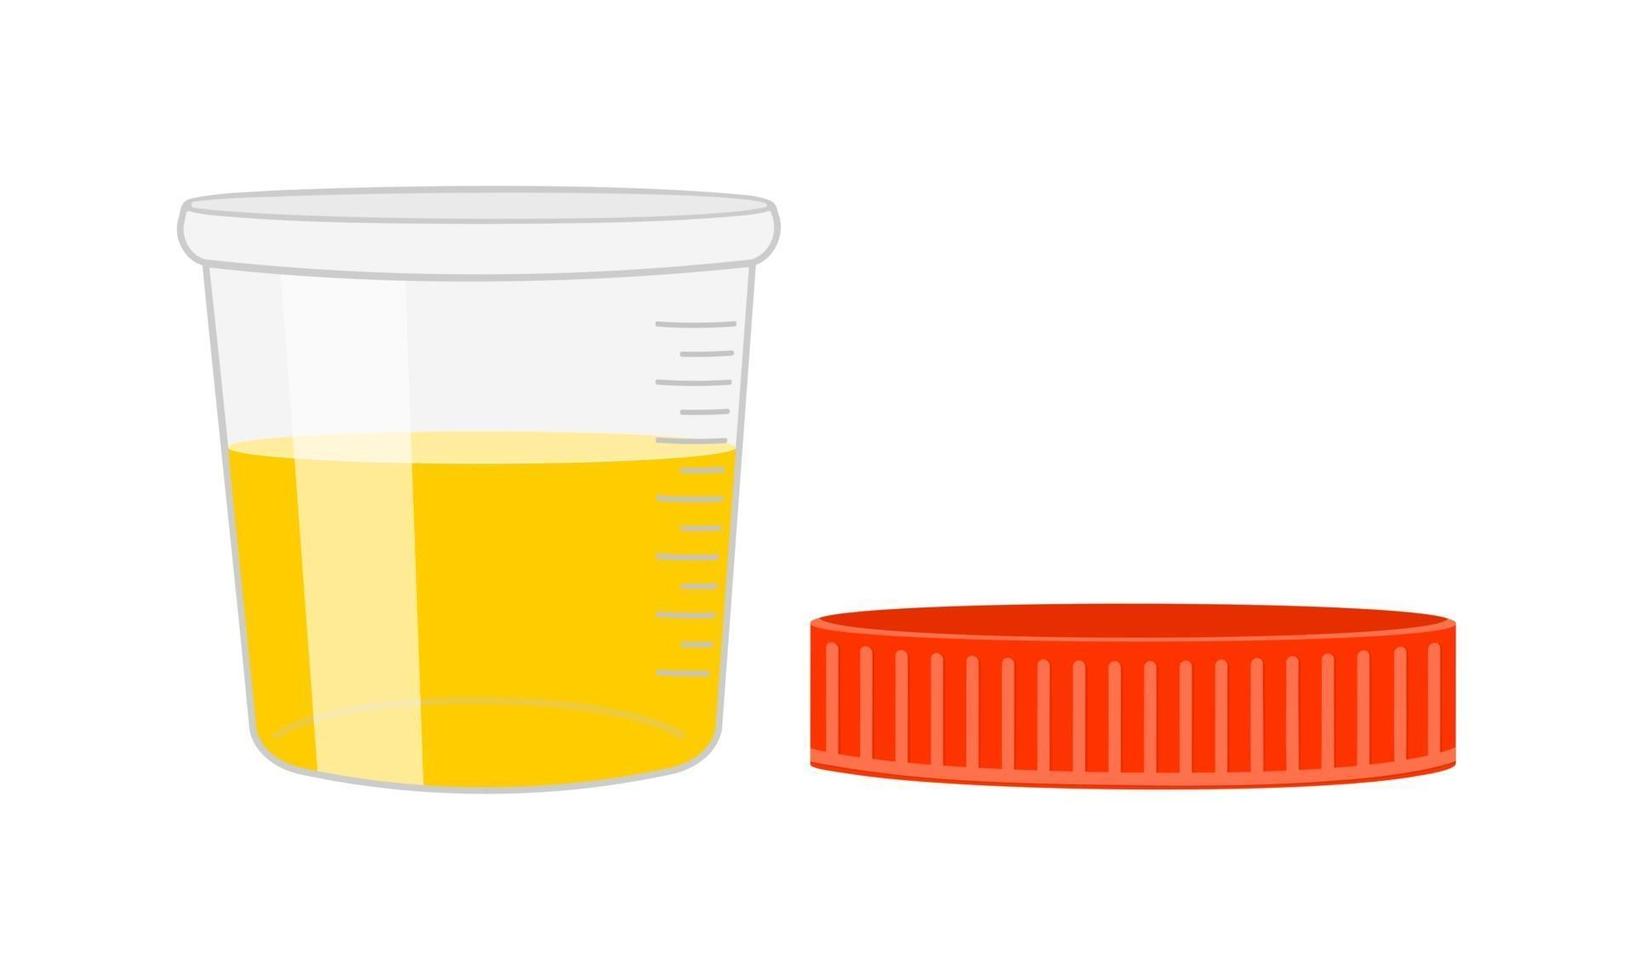 Urinalysis. Urine sample, full open plastic container with removed cover. Laboratory examination and diagnostics concept vector